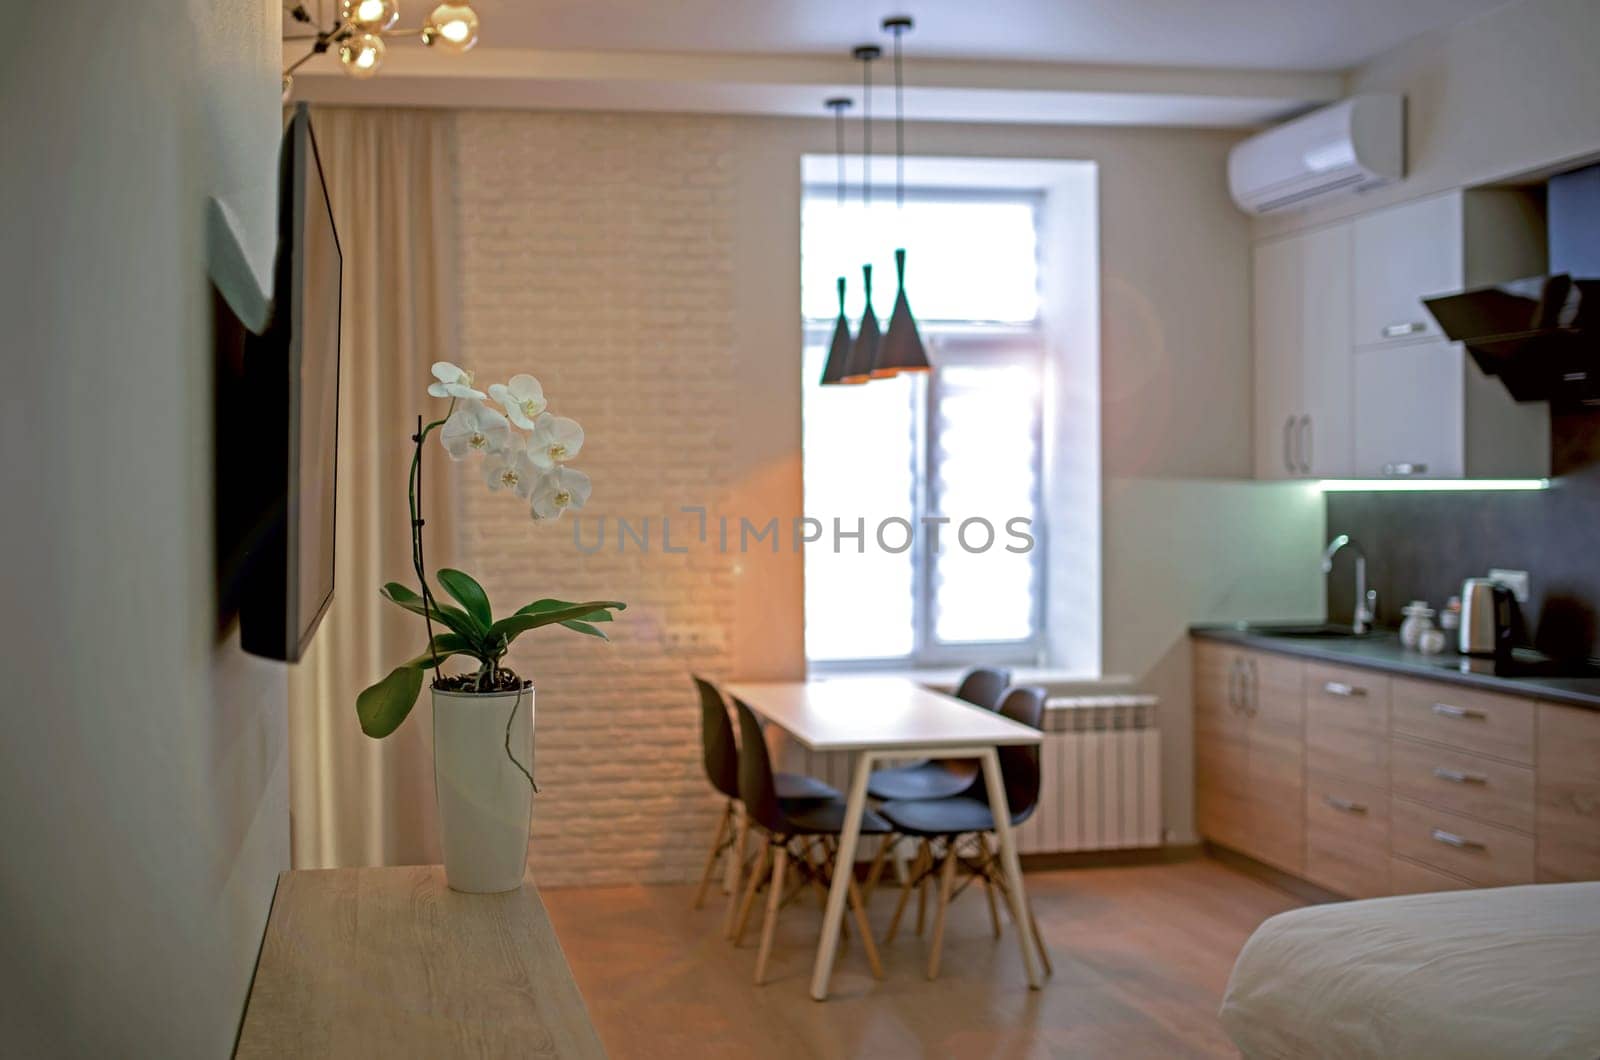 Small room with a sofa and kitchen set. Interior living room and kitchen. Interior of compact small house. Interior cottage Cooking area next to sofa. white orchid in a pot stands in the living room interior by aprilphoto